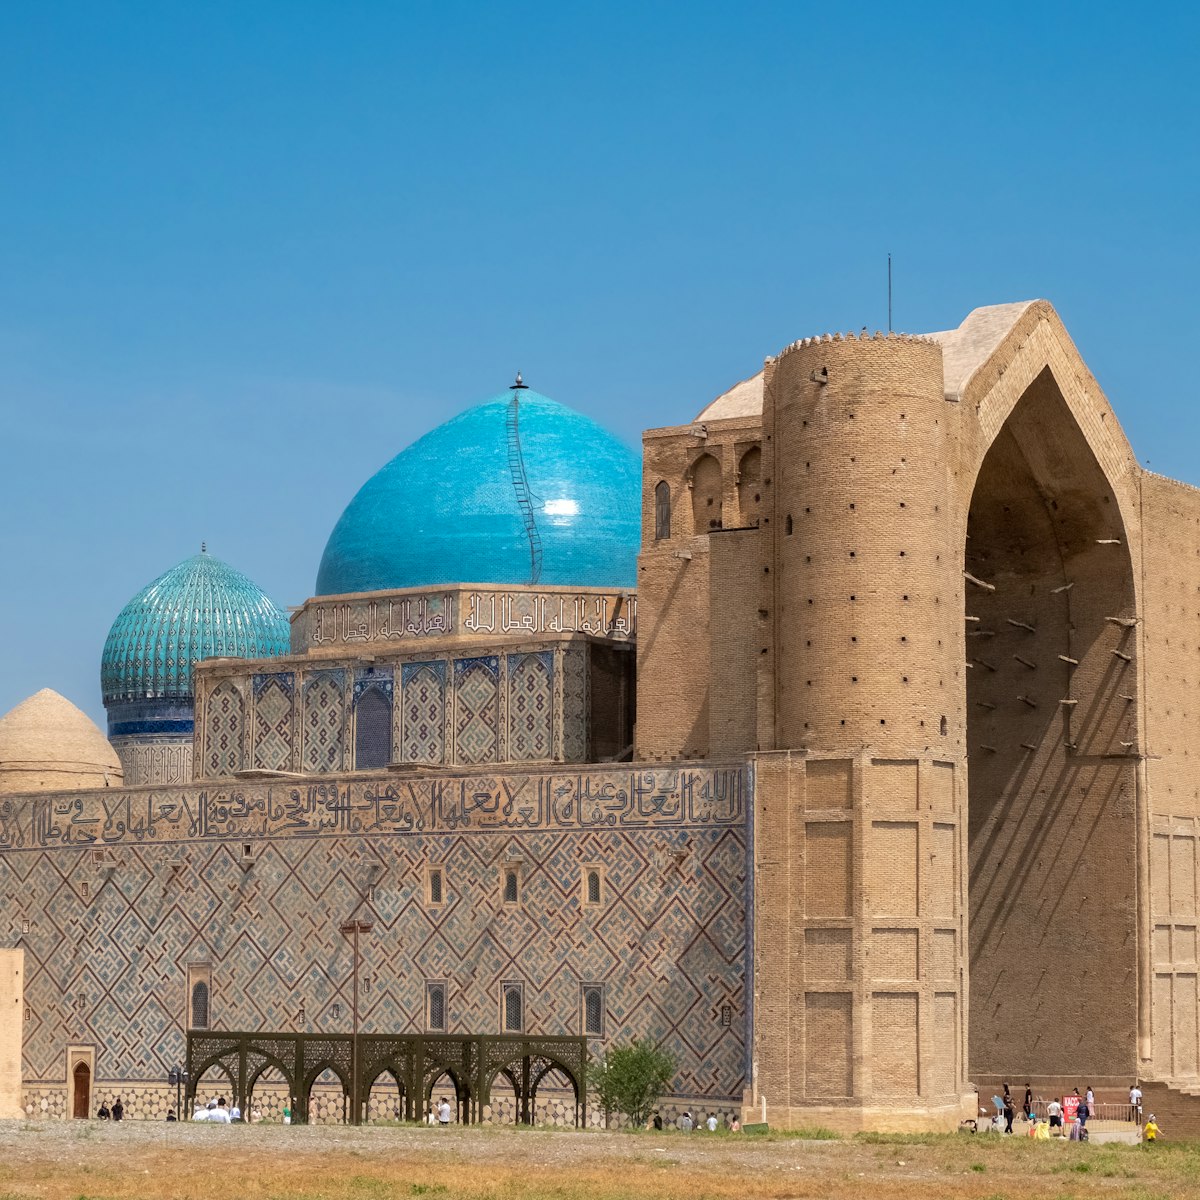 The Mausoleum of Khoja Ahmed Yasawi in the city of Turkestan.